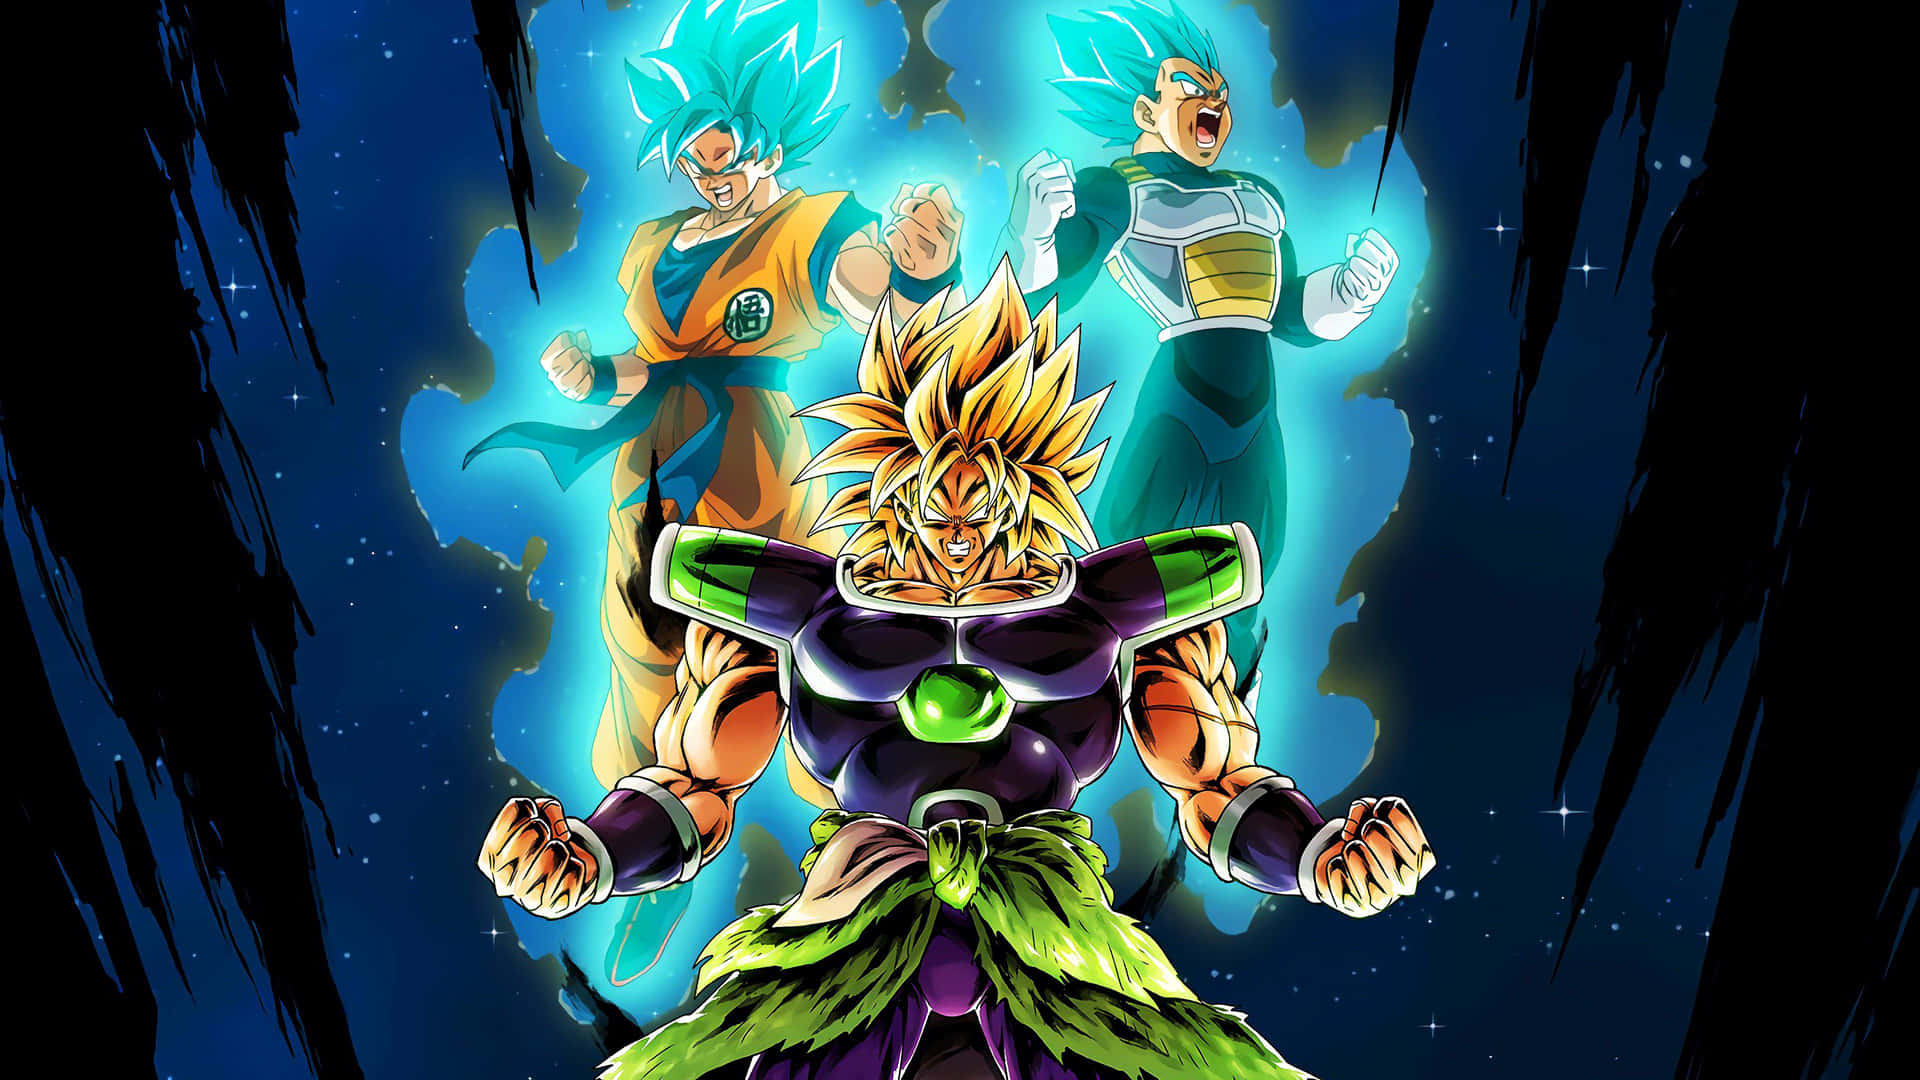 "Unleash your inner warrior and master the power of a Super Saiyan with Dragon Ball Z's Broly." Wallpaper